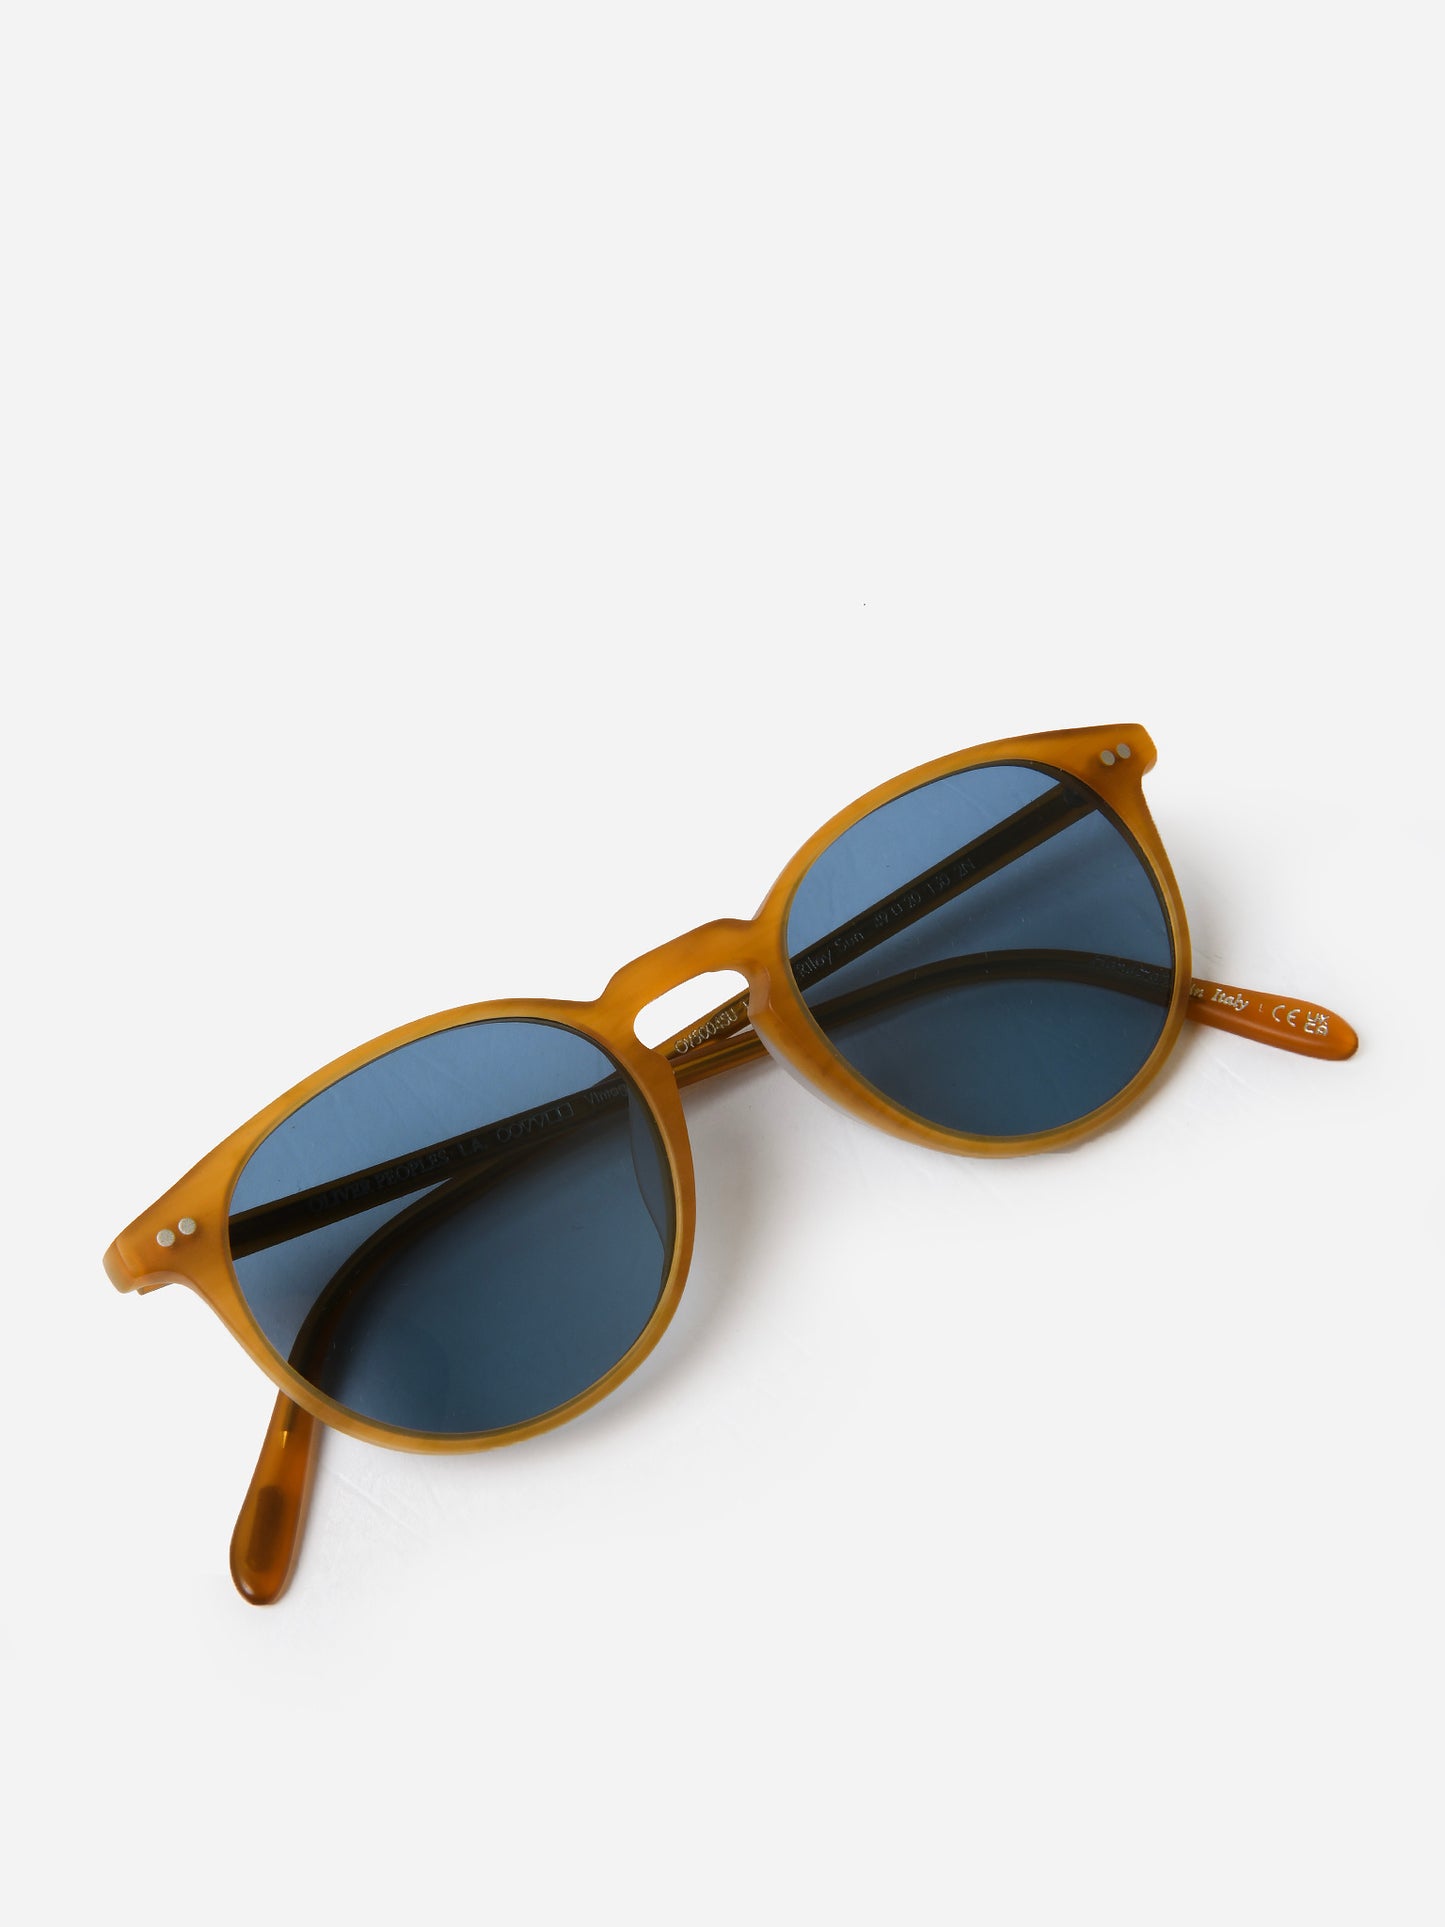 Oliver Peoples Riley Sunglasses